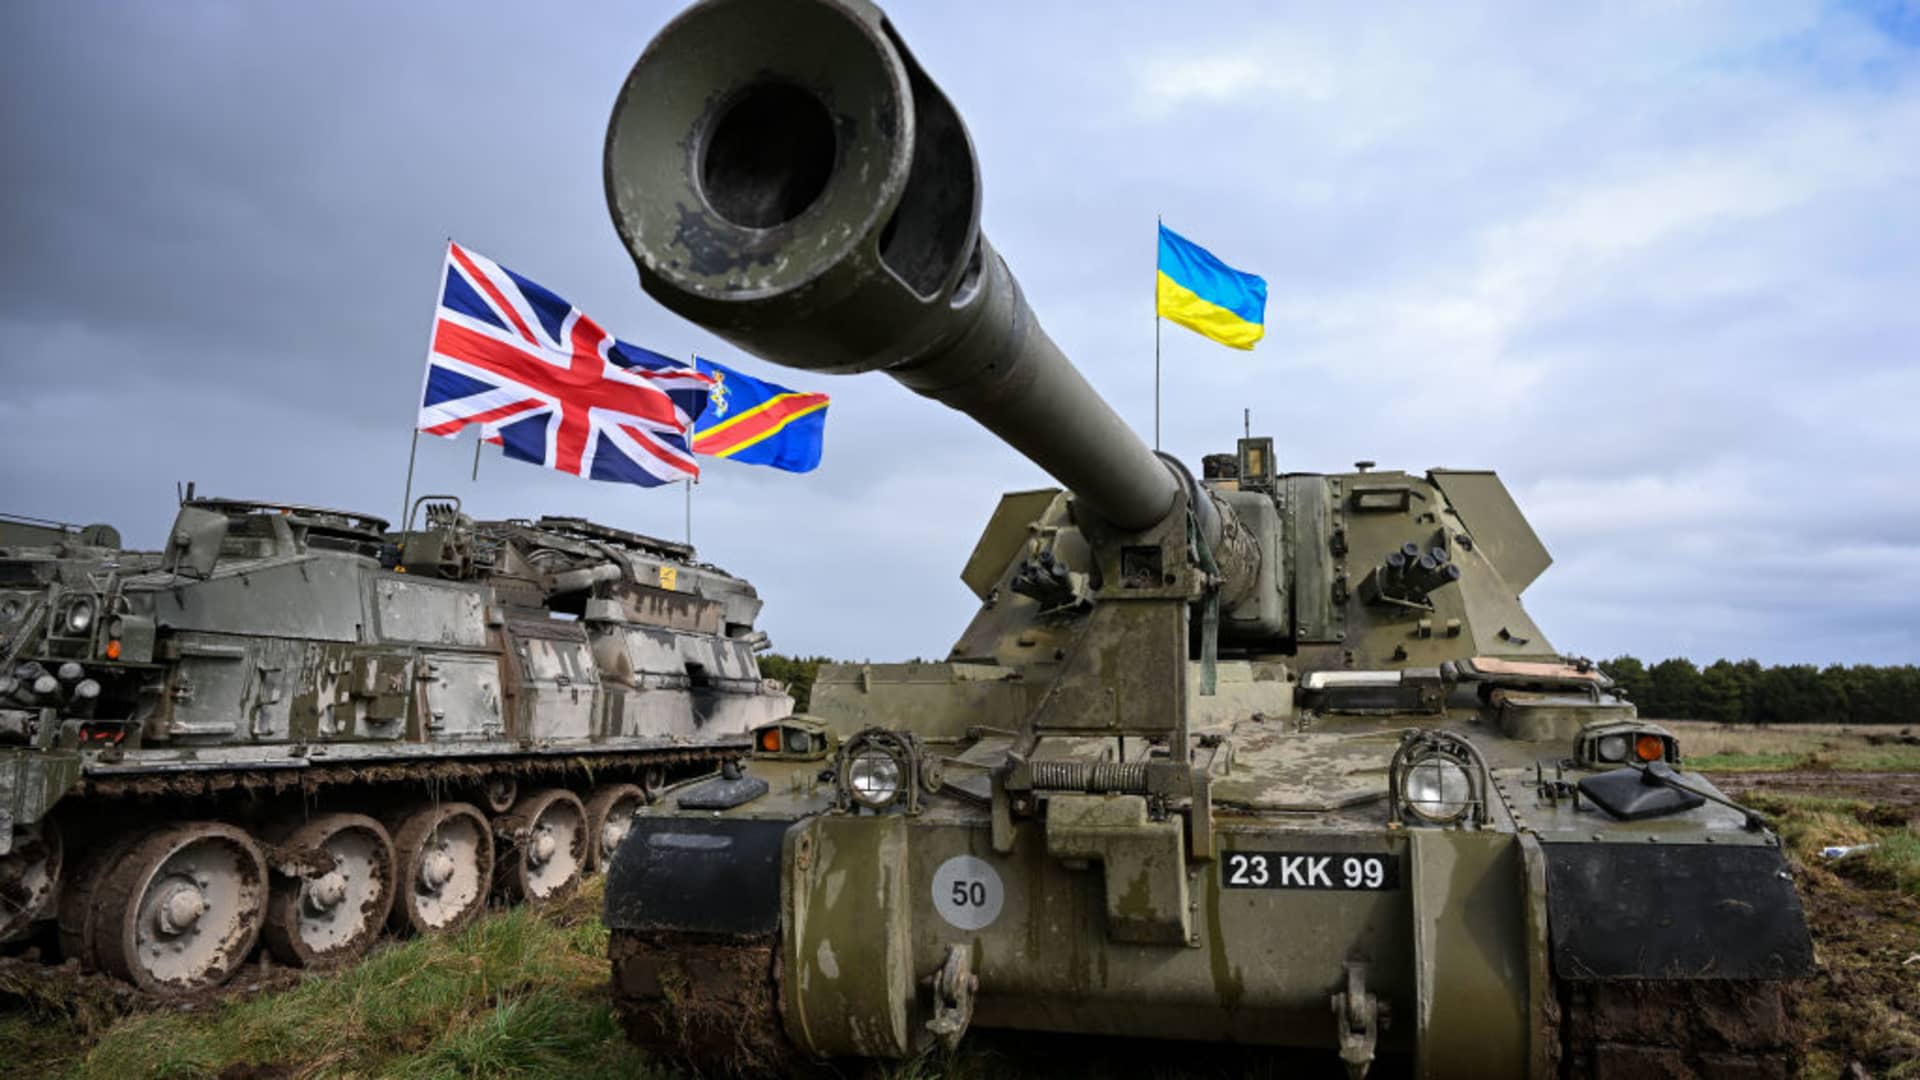 An AS90 155mm self-propelled gun is seen, on March 24, 2023 in South West, England. Ukrainian artillery recruits come to the end of their training on AS90 155mm self-propelled gun. 